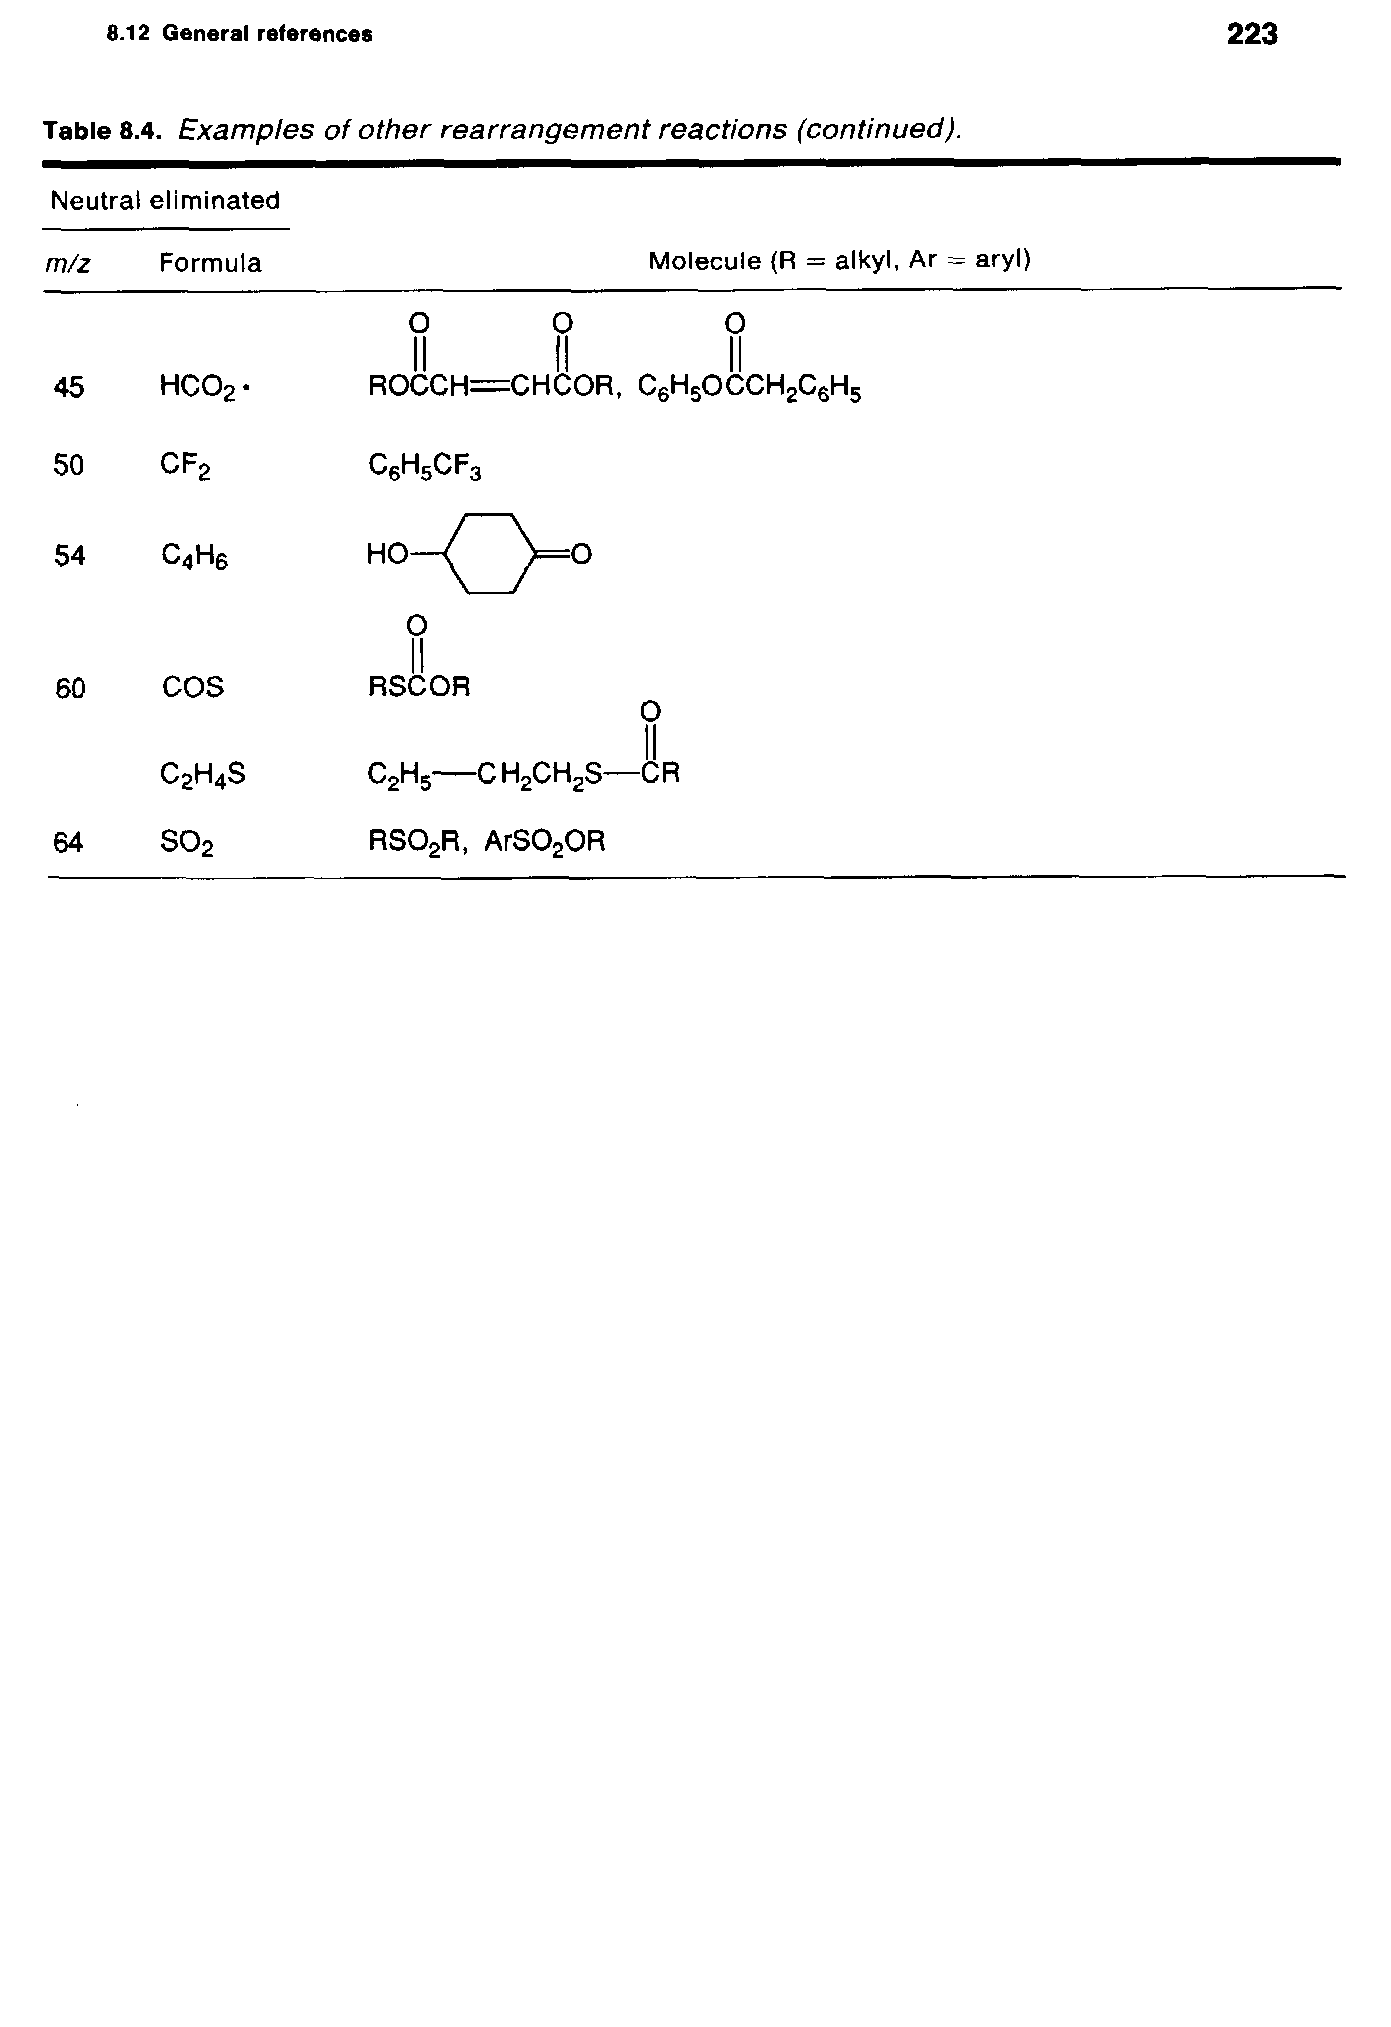 Table 8.4. Examples of other rearrangement reactions (continued).